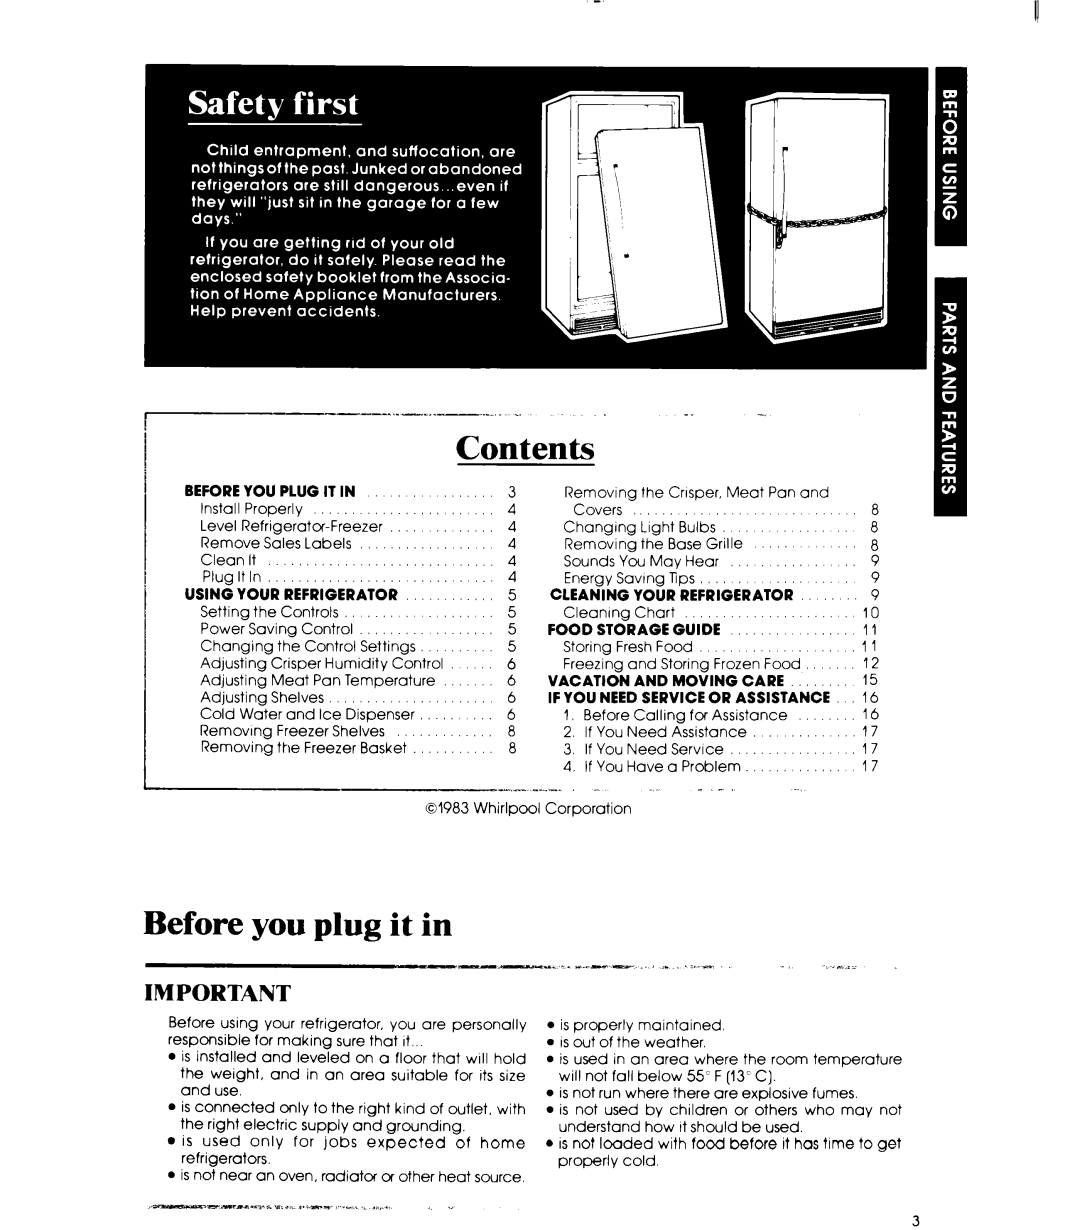 Whirlpool ED25SM manual Contents, Before you plug it in 